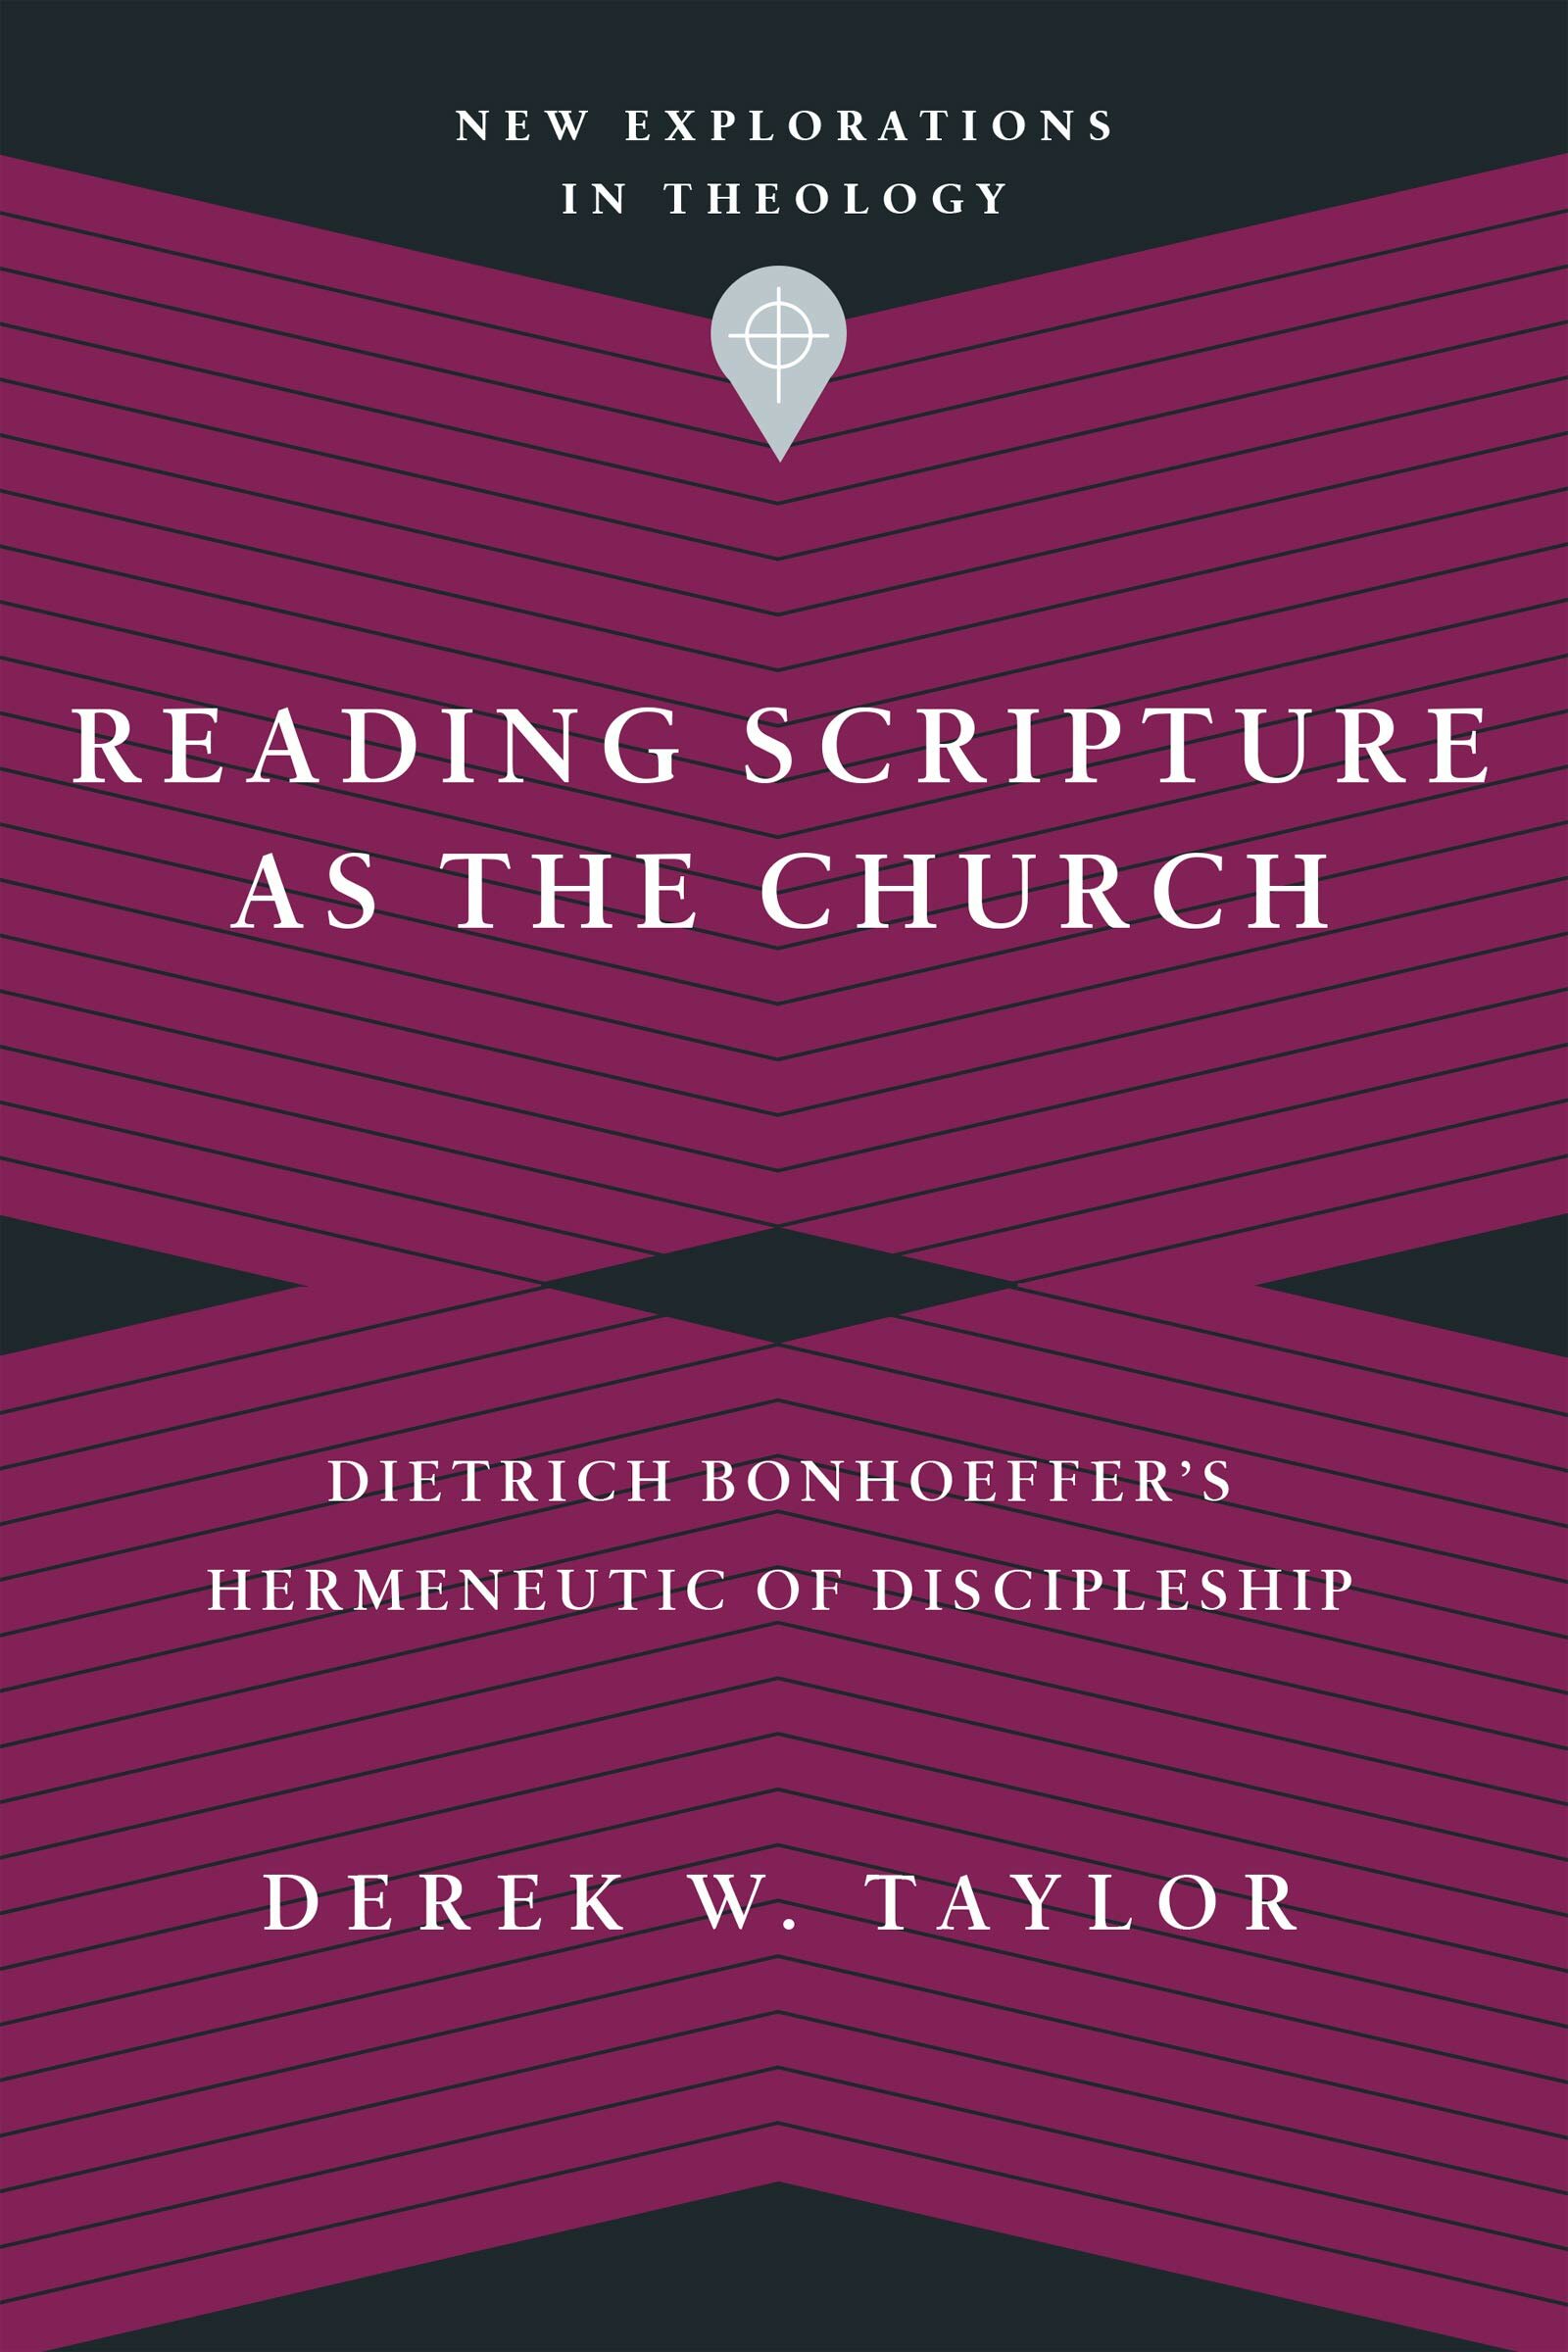 Reading Scripture as the Church: Dietrich Bonhoeffer’s Hermeneutic of Discipleship (New Explorations in Theology)